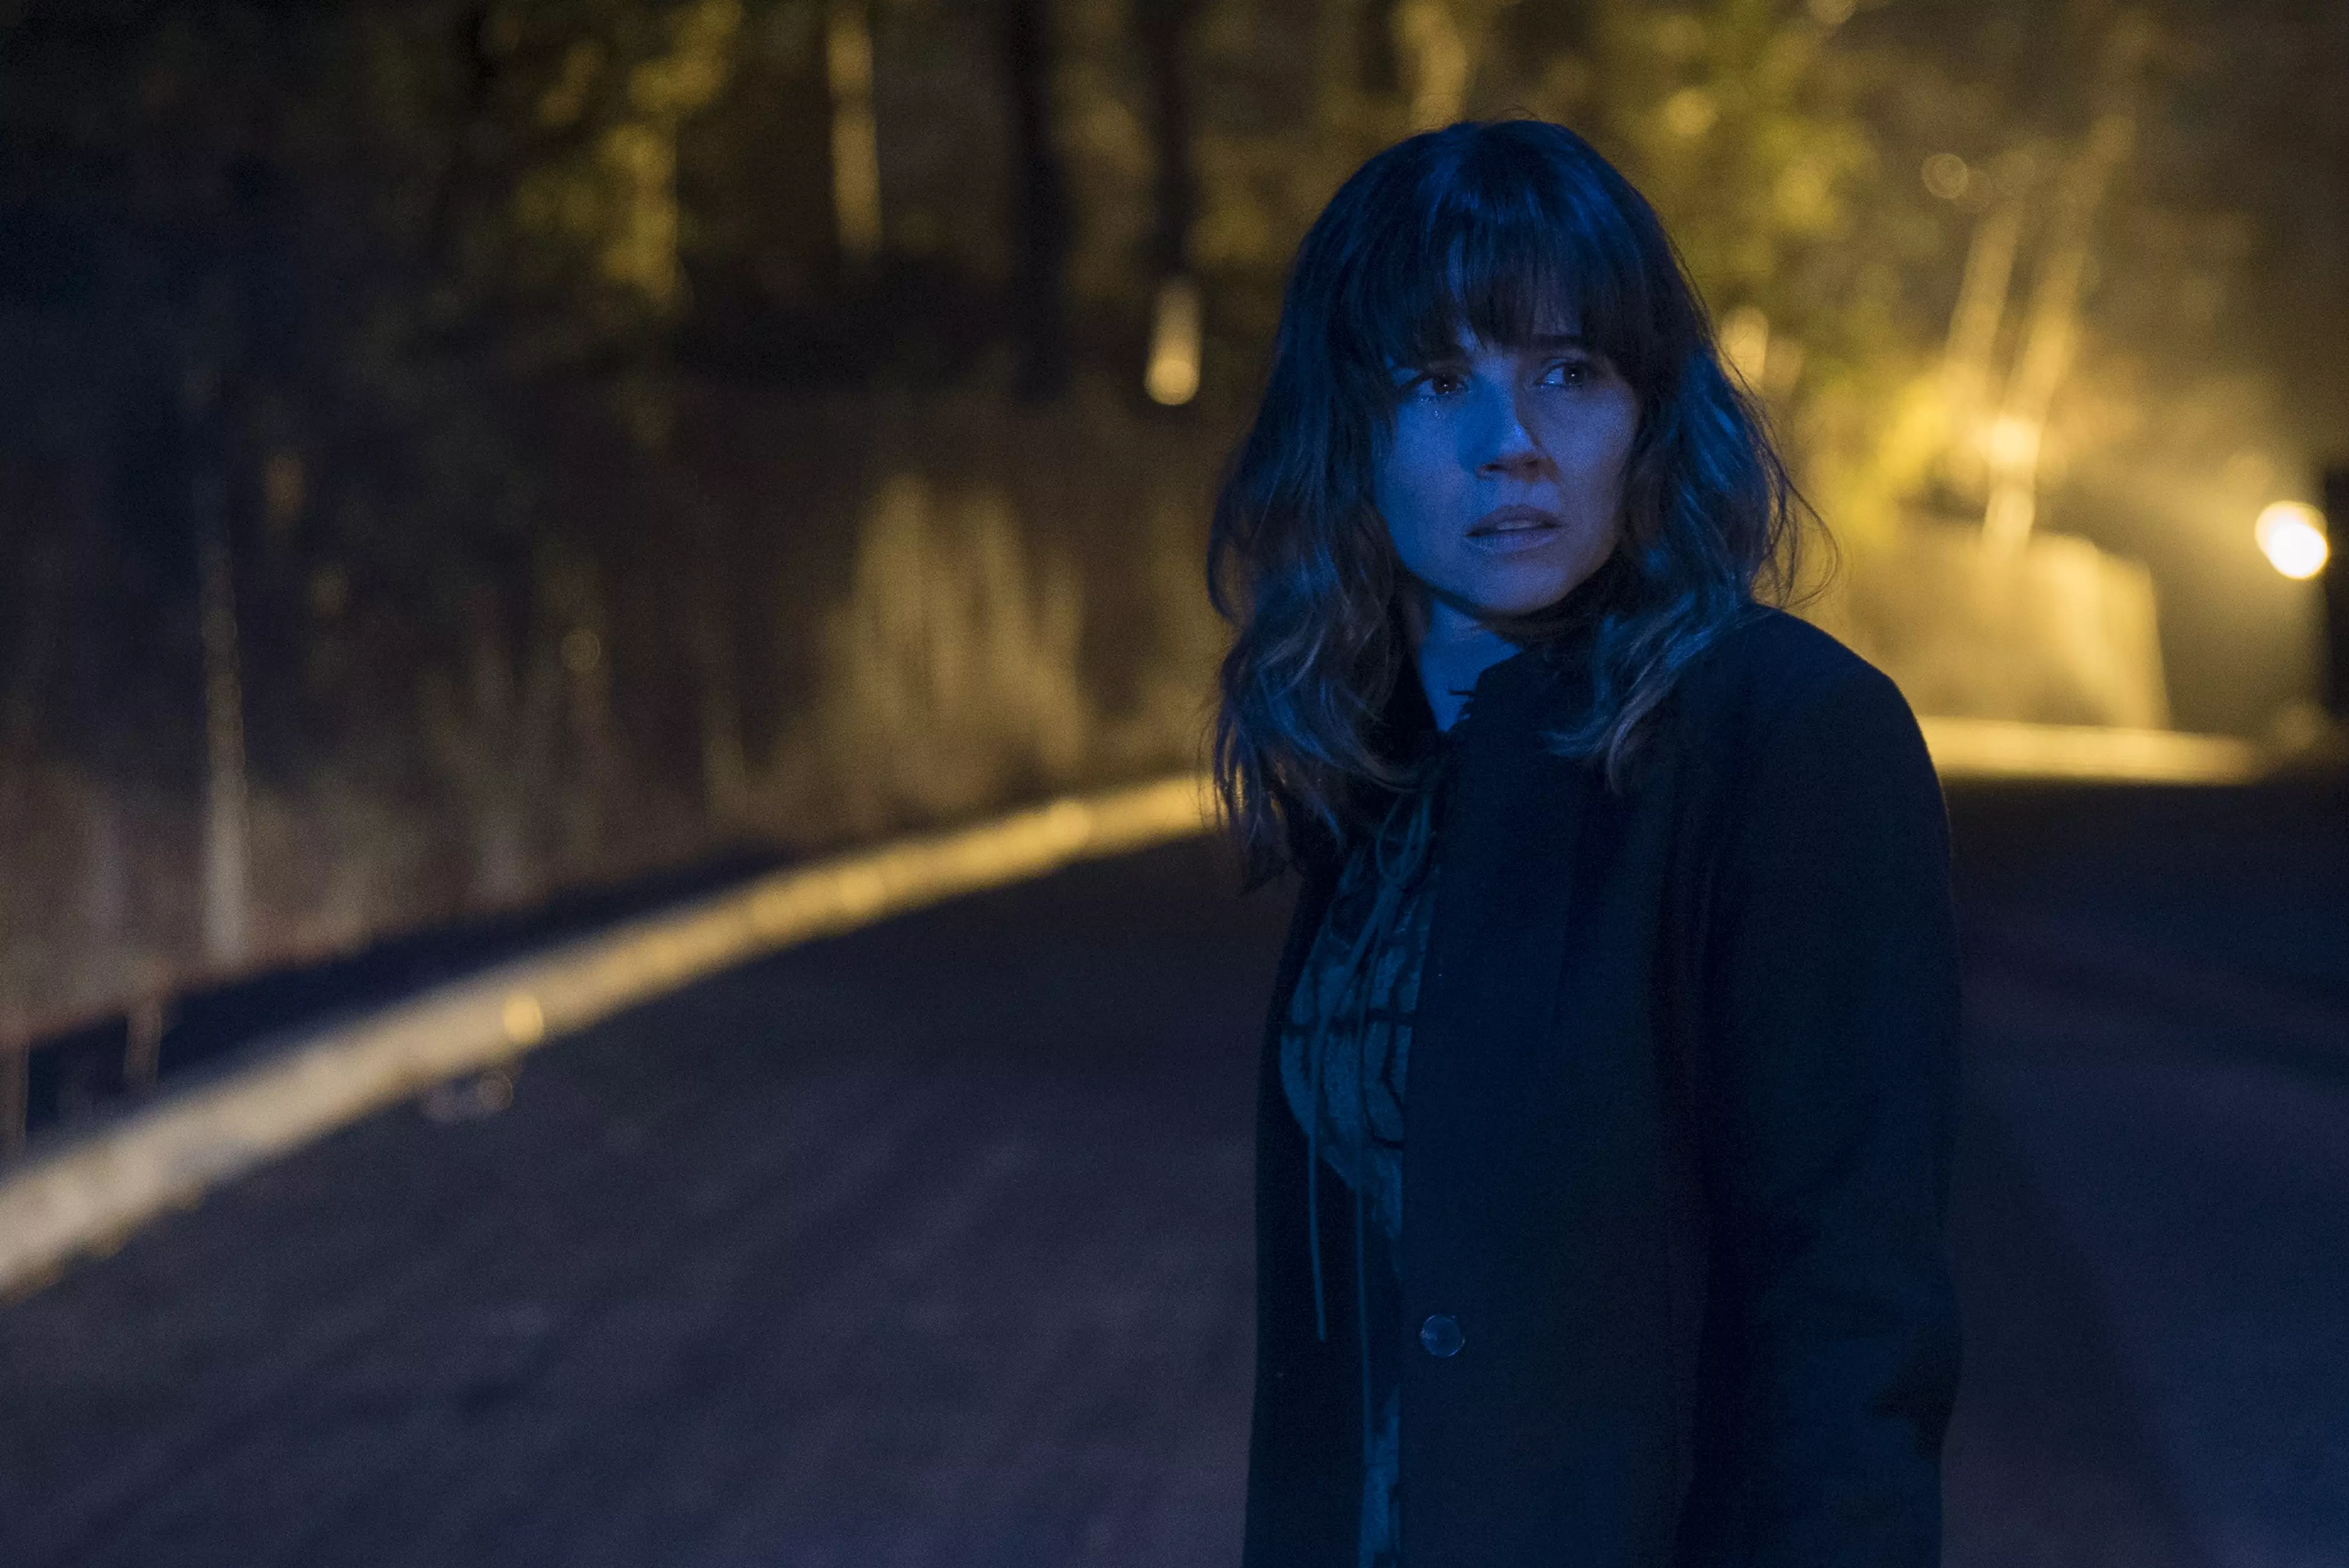 Linda Cardellini is returning for season 2 and promises more twists and turns (